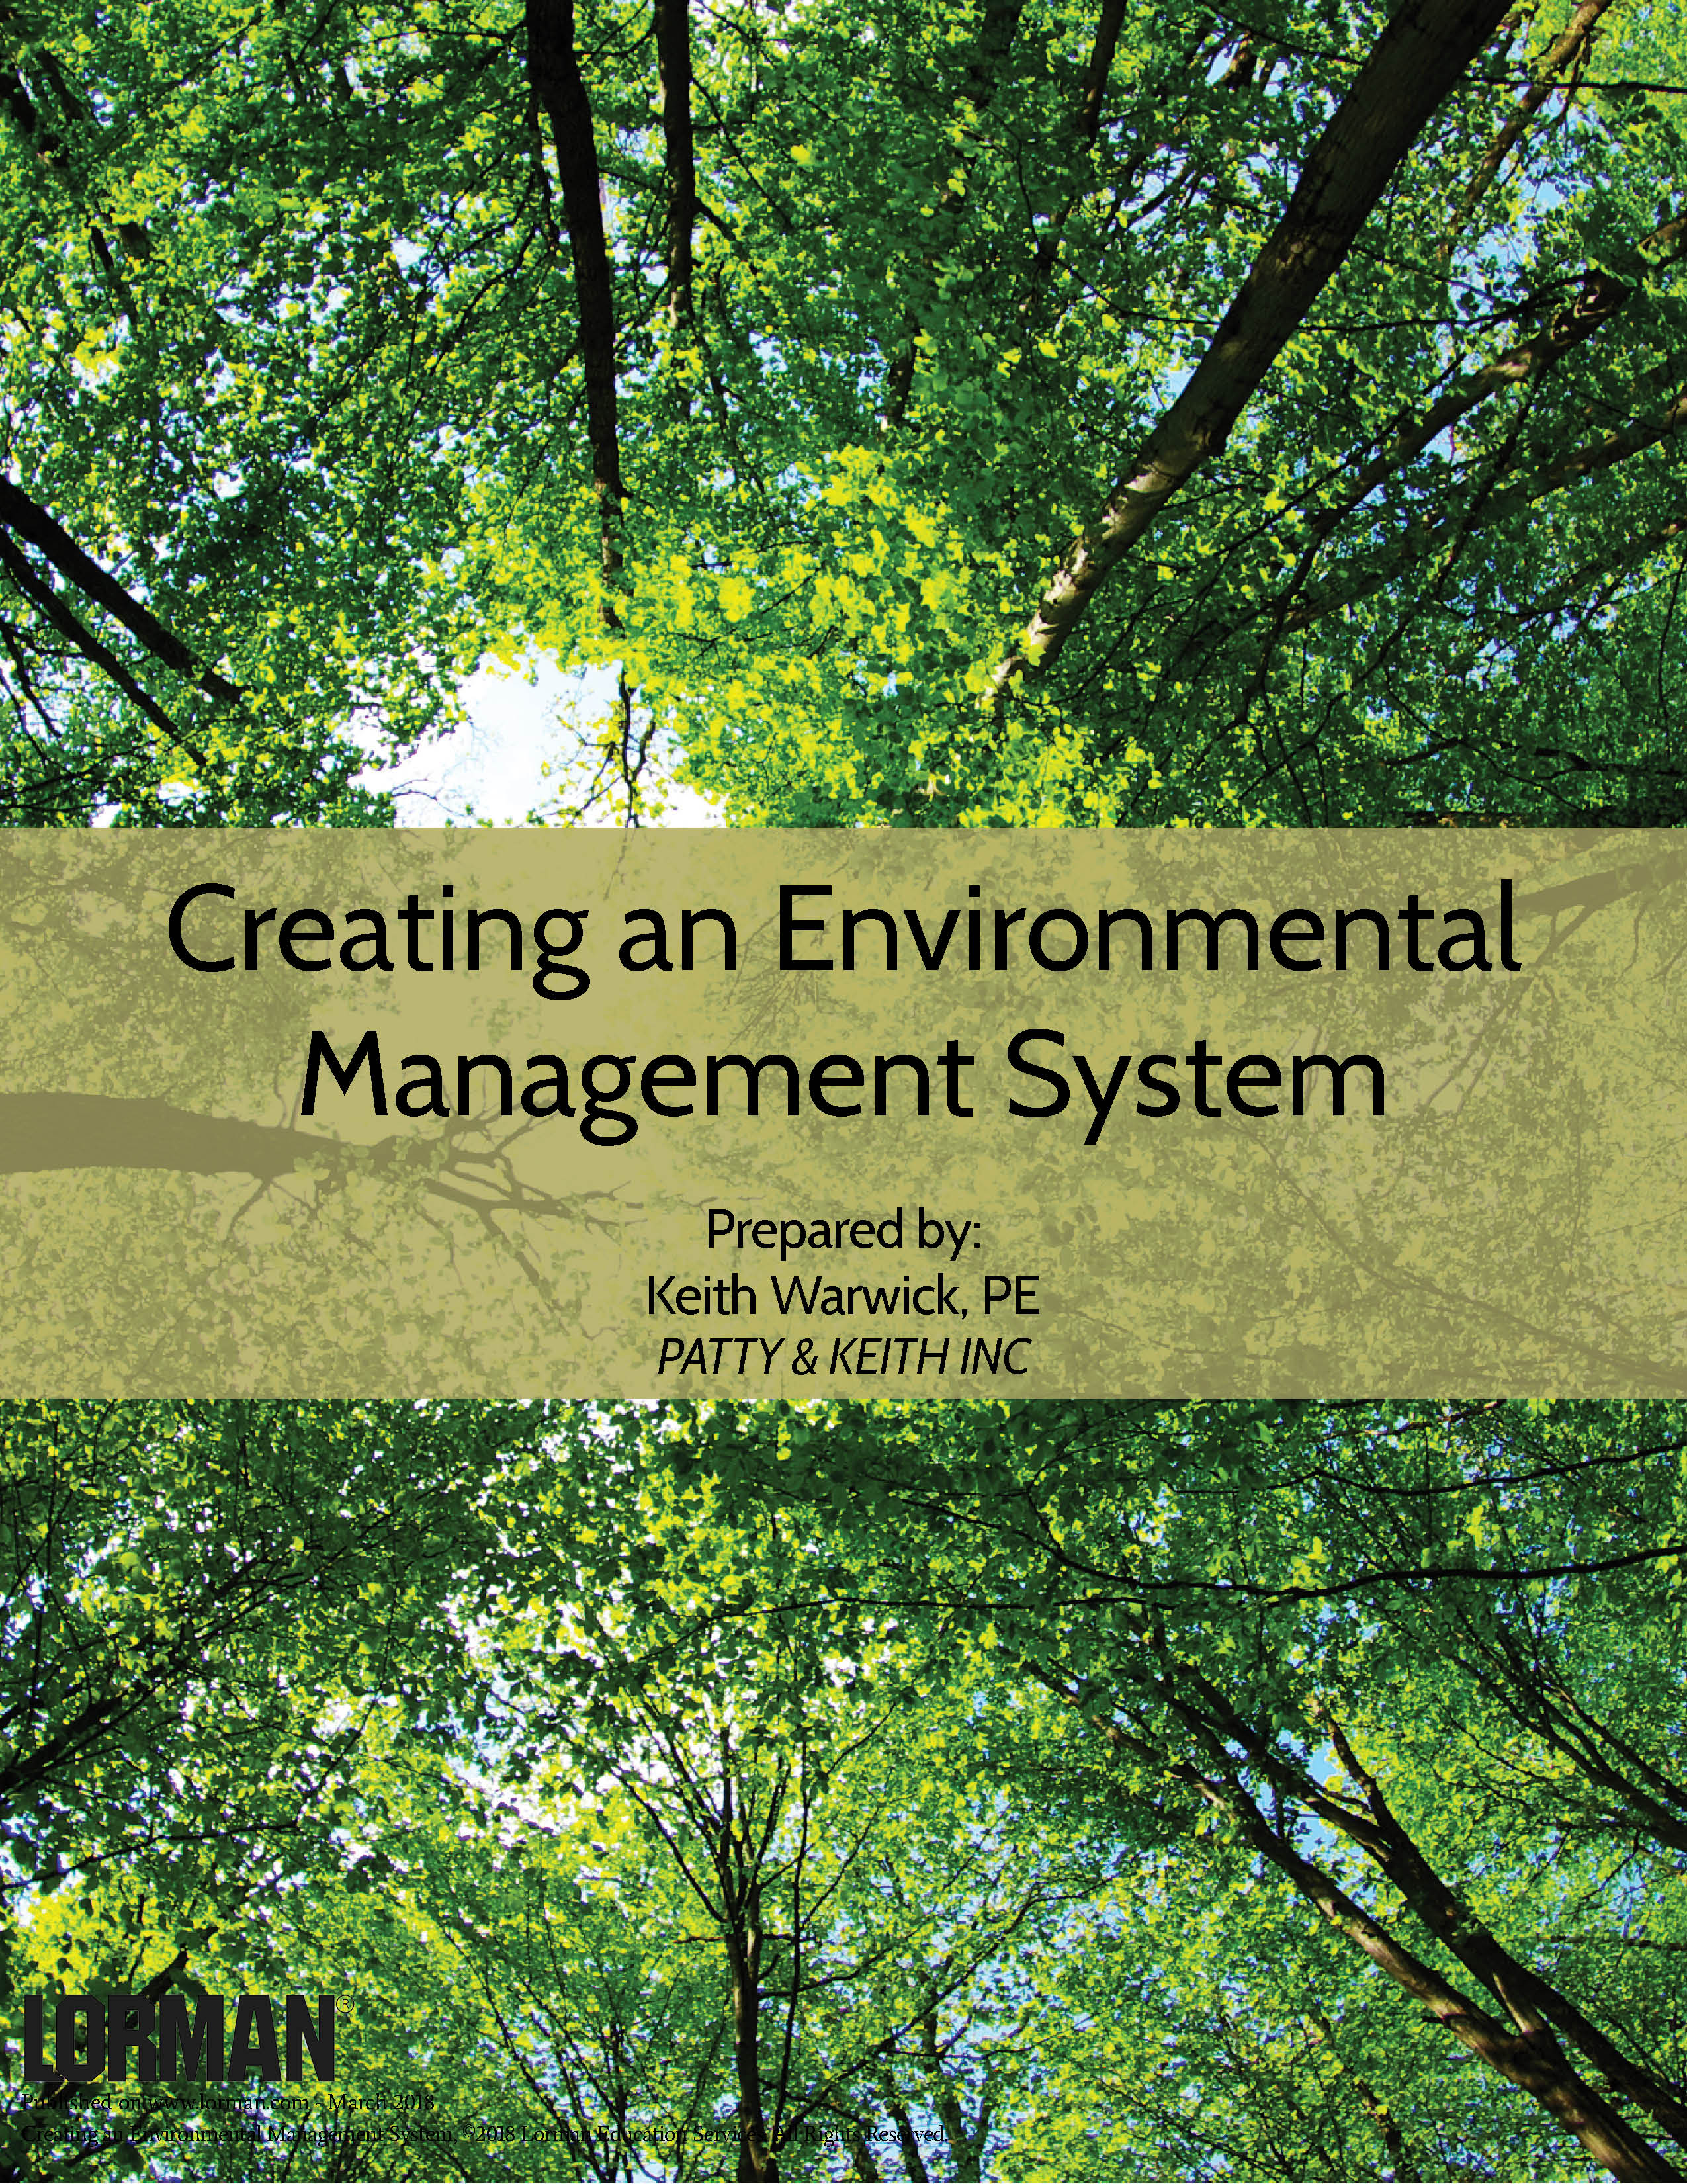 Creating an Environmental Management System